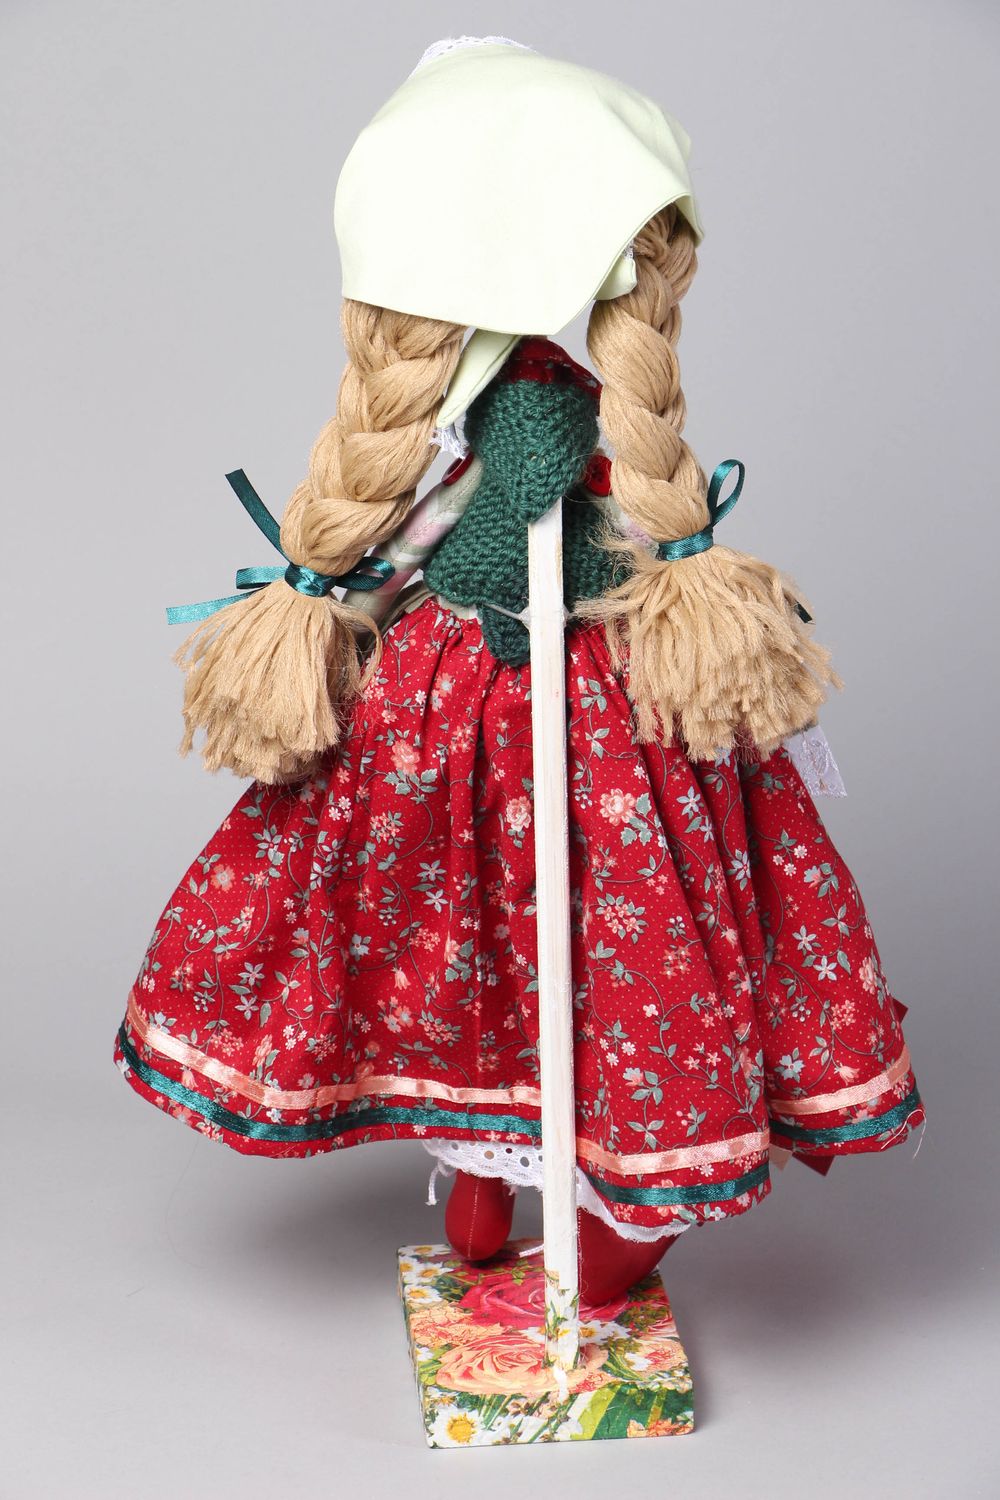 Handmade fabric doll with stand photo 3